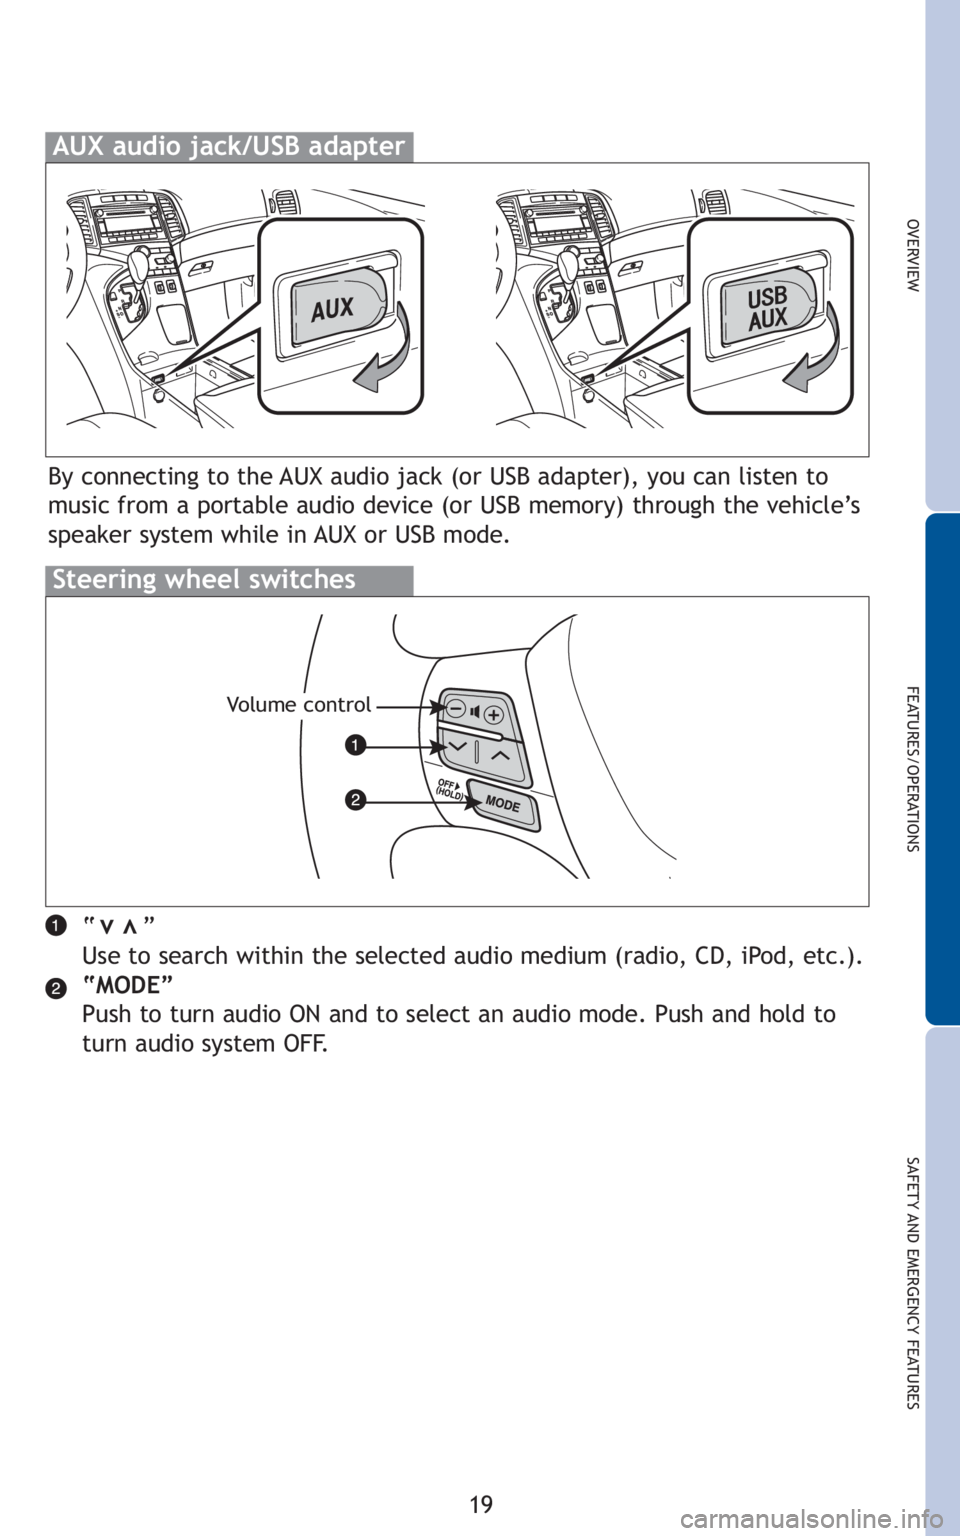 TOYOTA VENZA 2010  Owners Manual (in English) 19
OVERVIEW
FEATURES/OPERATIONS
SAFETY AND EMERGENCY FEATURES
“      ”
Use to search within the selected audio medium (radio, CD, iPod, etc.).
“MODE”
Push to turn audio ON and to select an aud